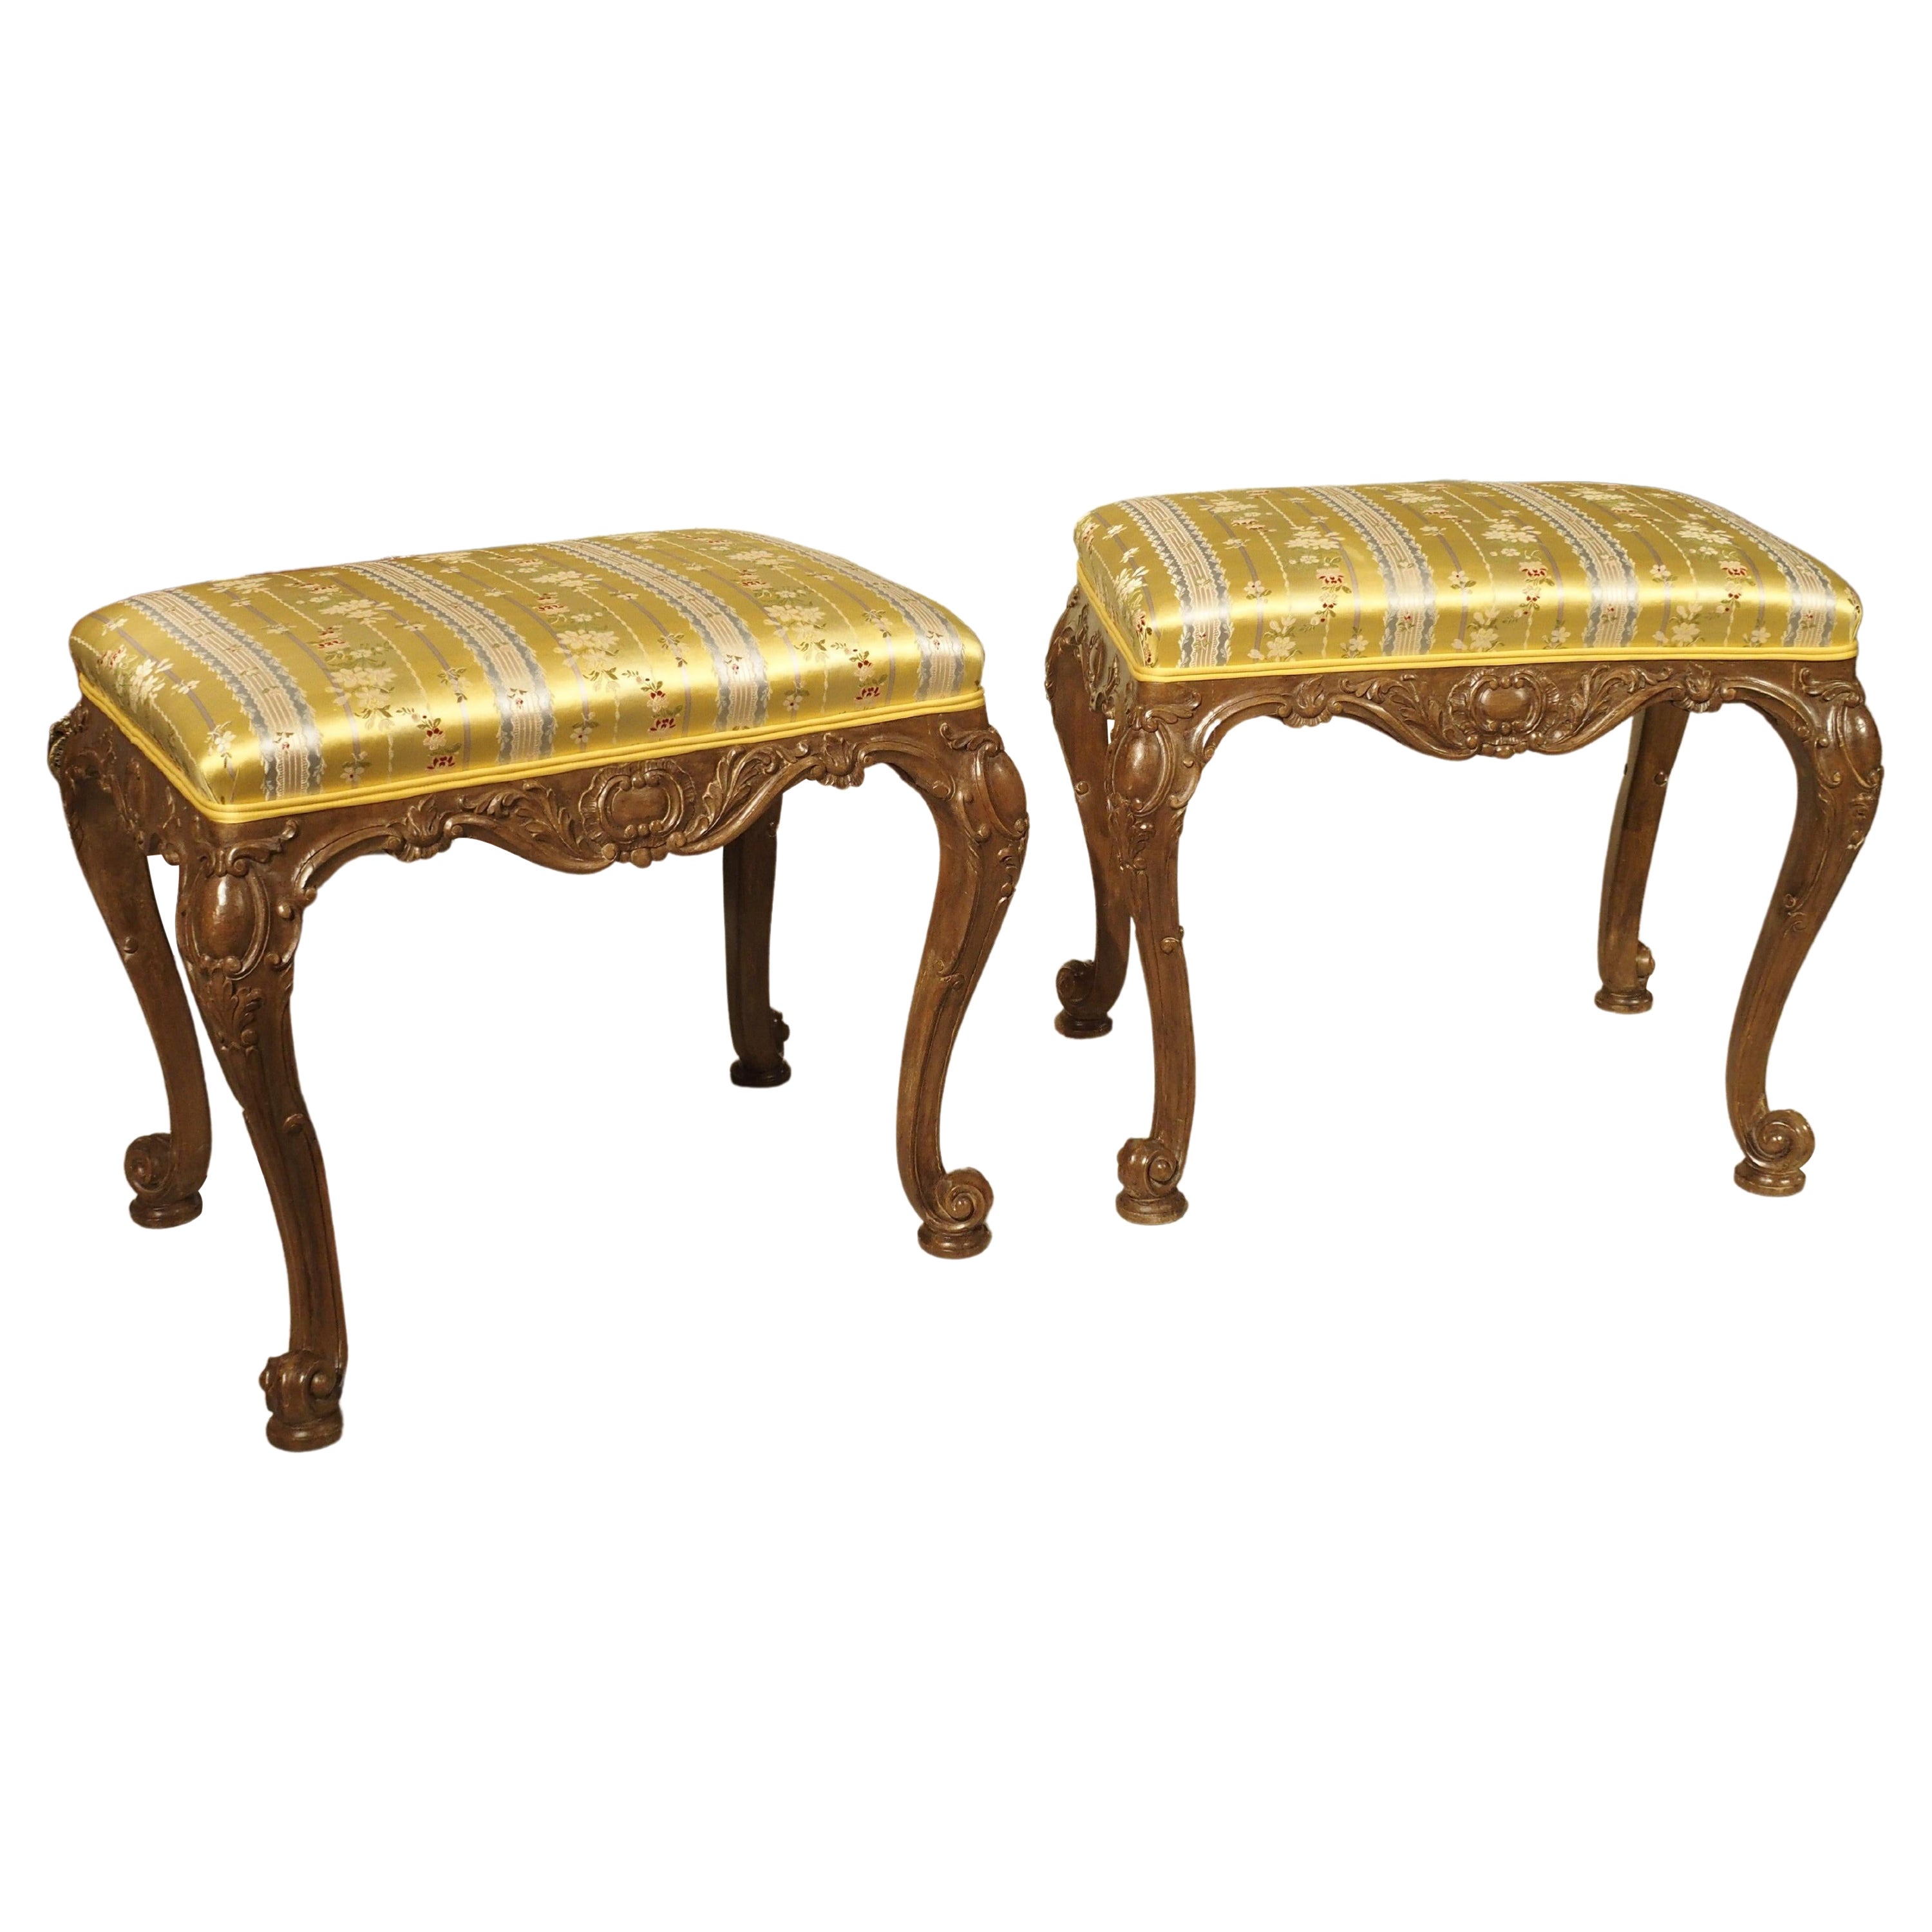 Pair of Well Carved French Louis XV Style Tabouret Stools with Silk Upholstery